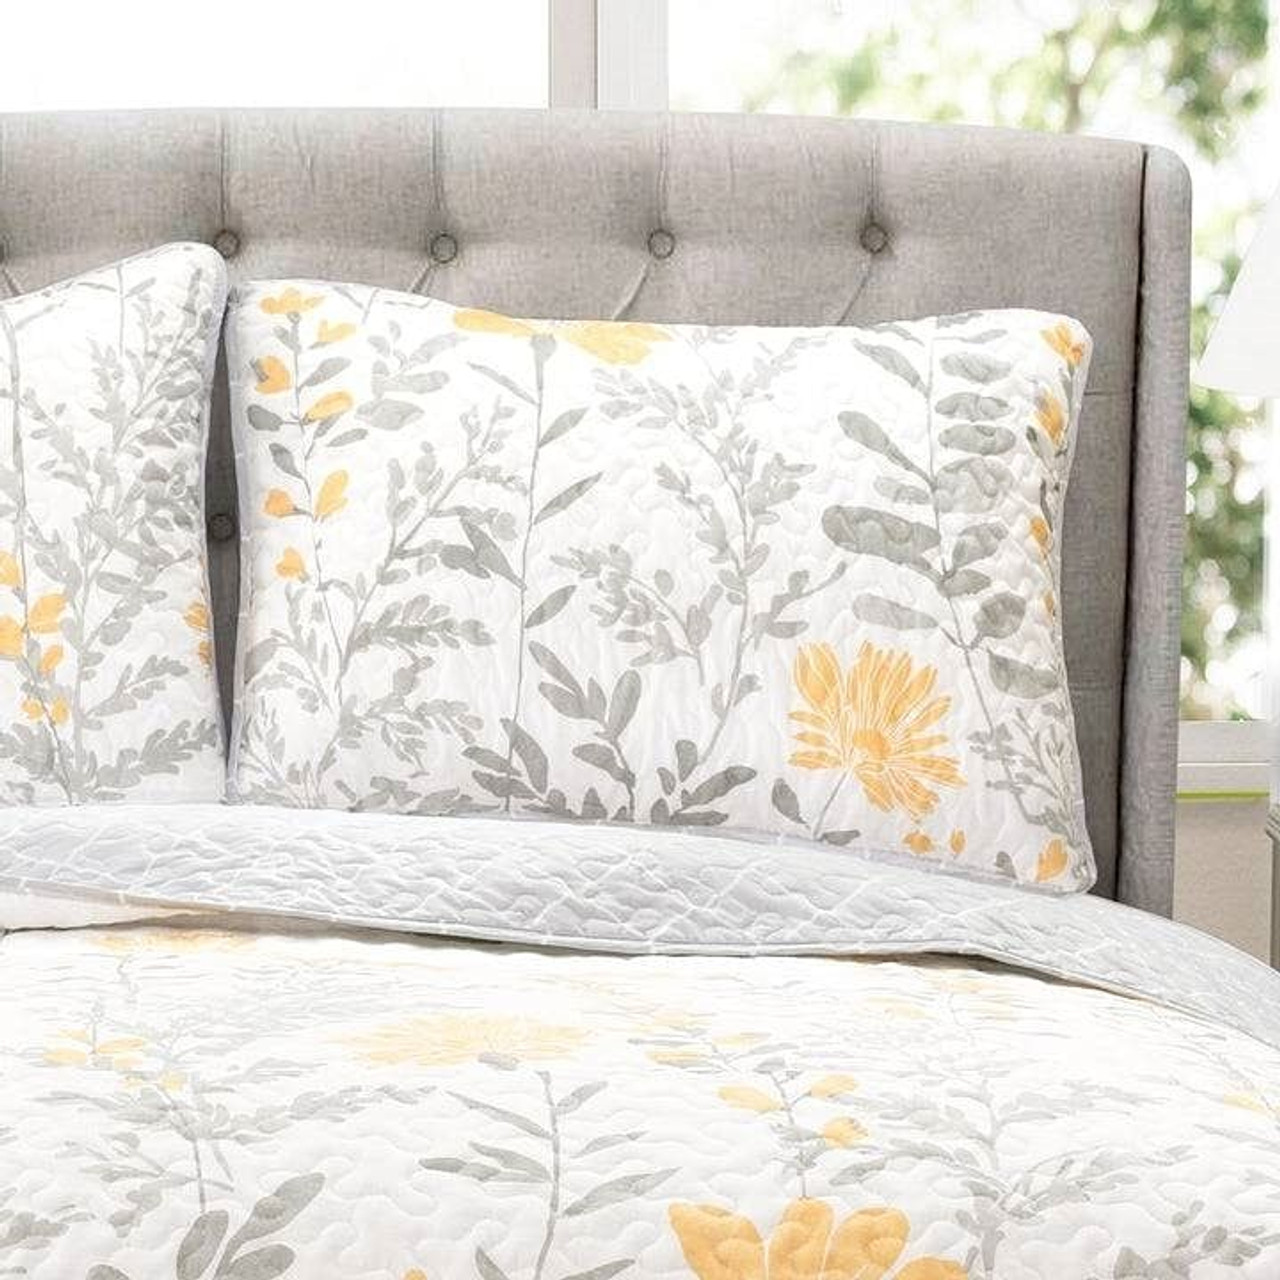 King size Yellow Grey Floral Light Thin Cotton Polyester Blend Quilt Set